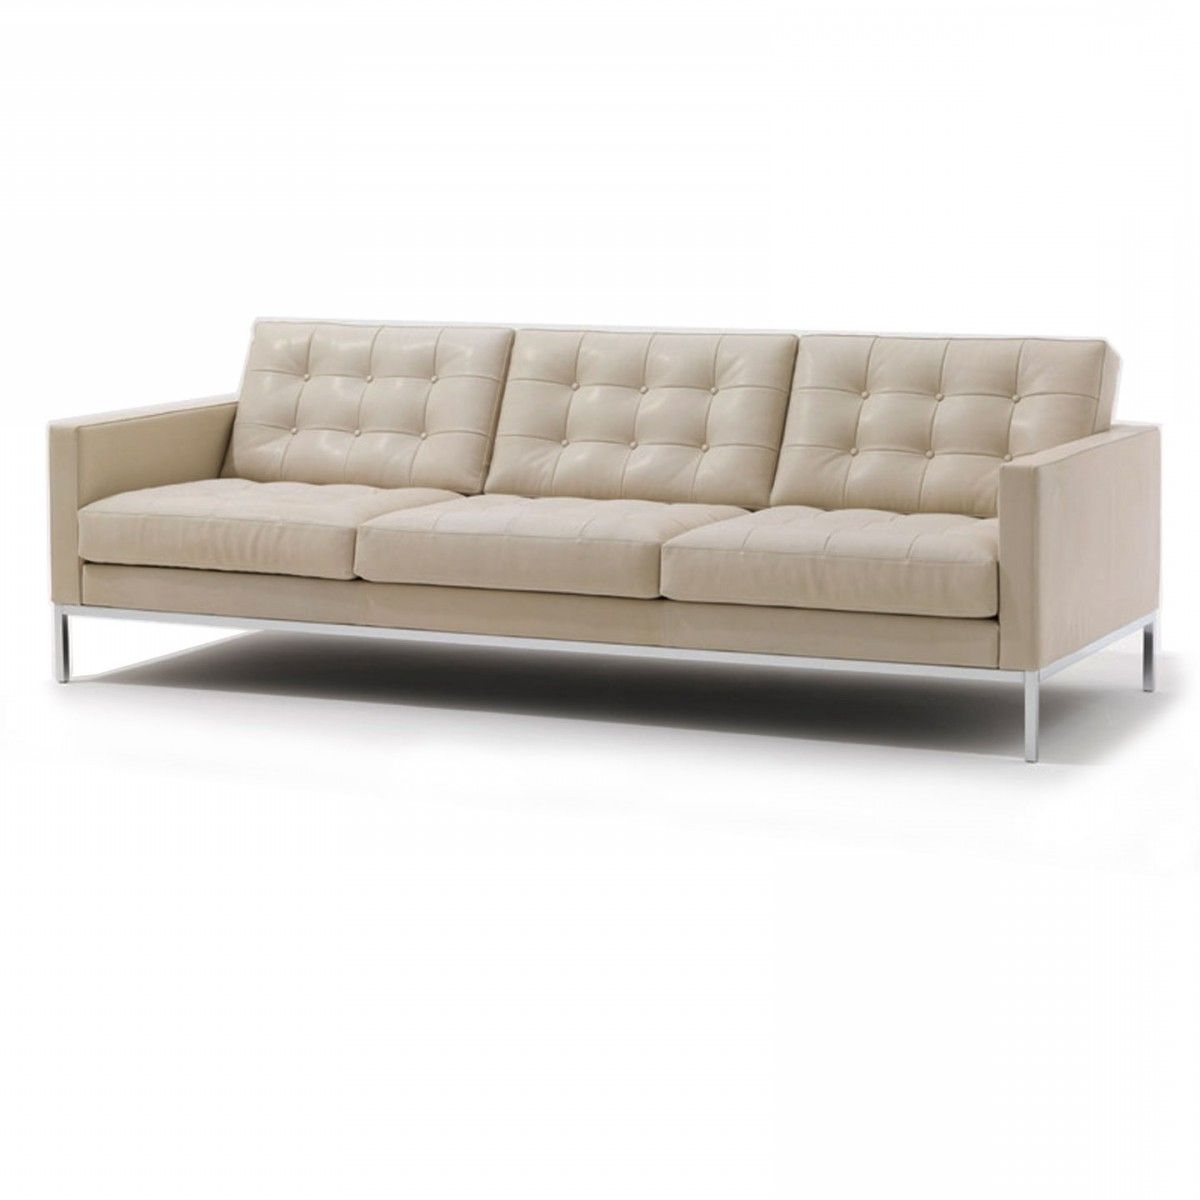 Widely Used Knoll Sofa 3 Seat Relax Pertaining To Florence Knoll 3 Seater Sofas (View 13 of 15)